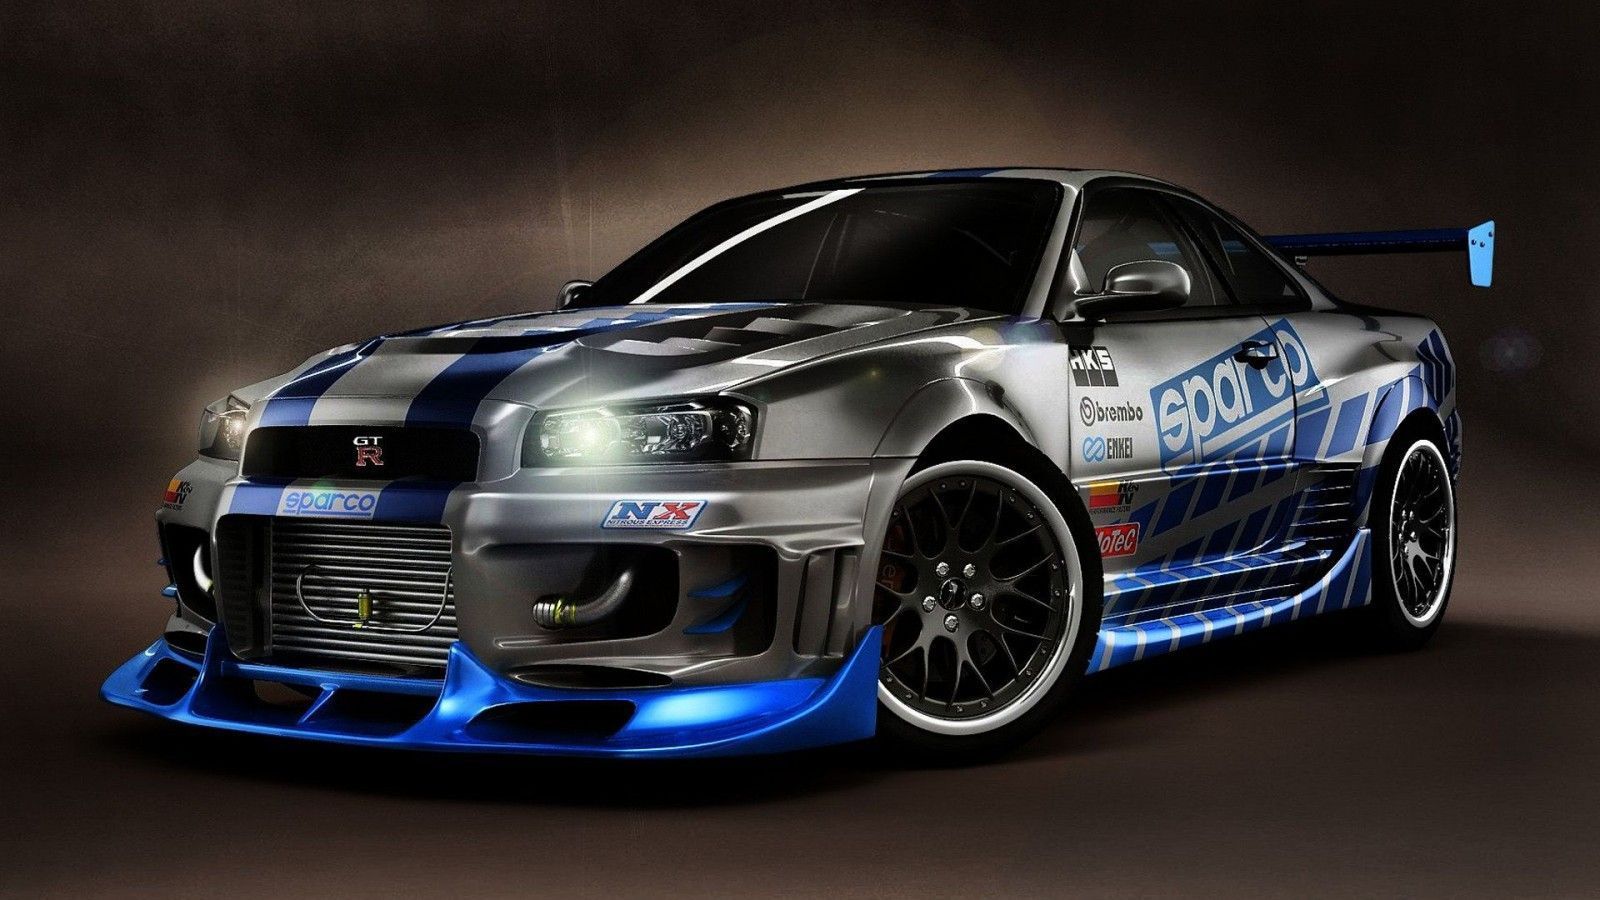 Fast And Furious Cars Wallpaper. Nissan gtr skyline, Nissan skyline gt, Nissan skyline